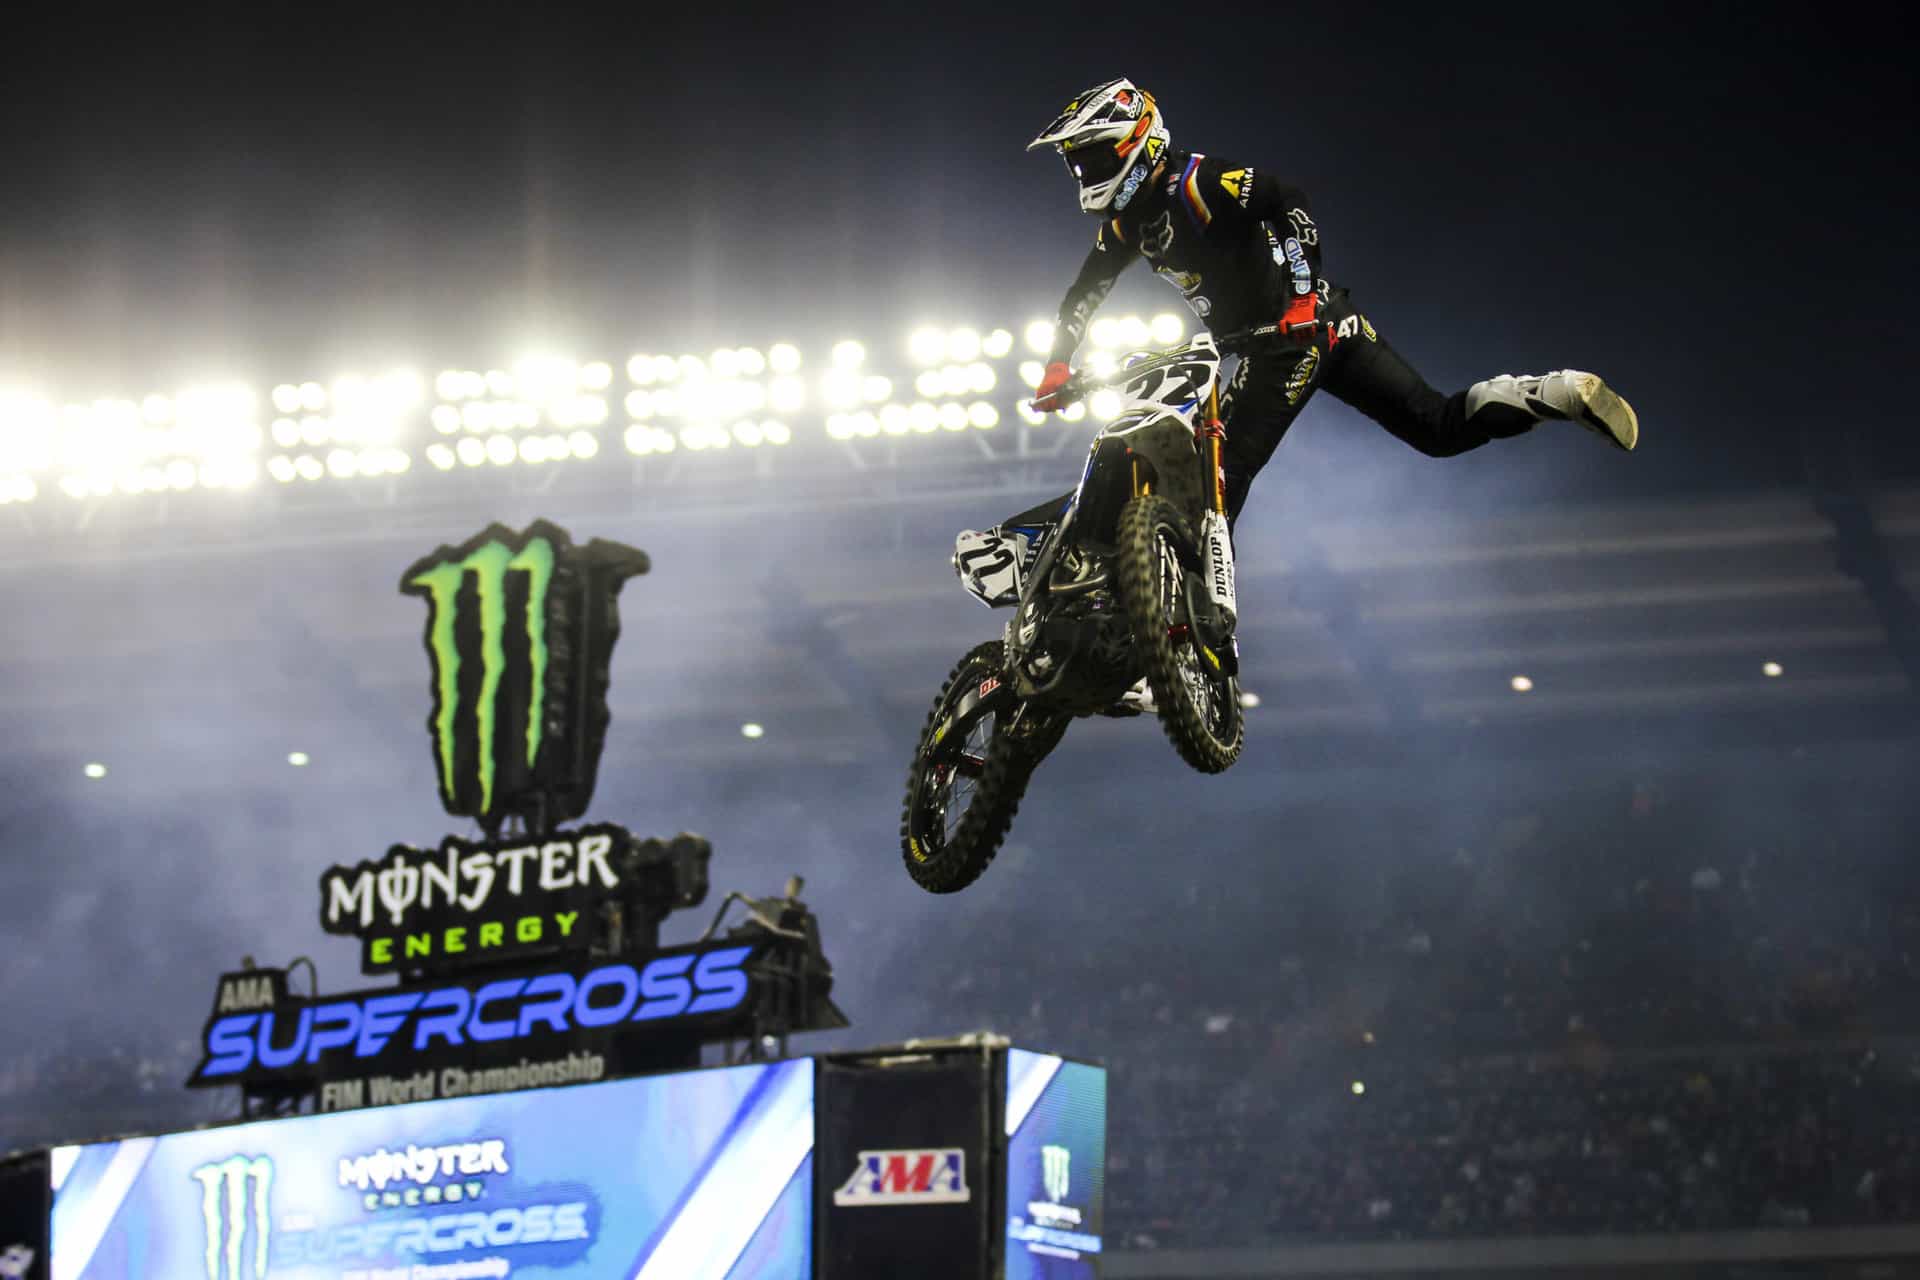 Chad Reed throws a Nac-Nac to the fans at Anaheim 2 in 2020 during his last full-time season with the Monster Energy AMA Supercross series. Photo by Rachel Schuoler / Kickin' the Tires.